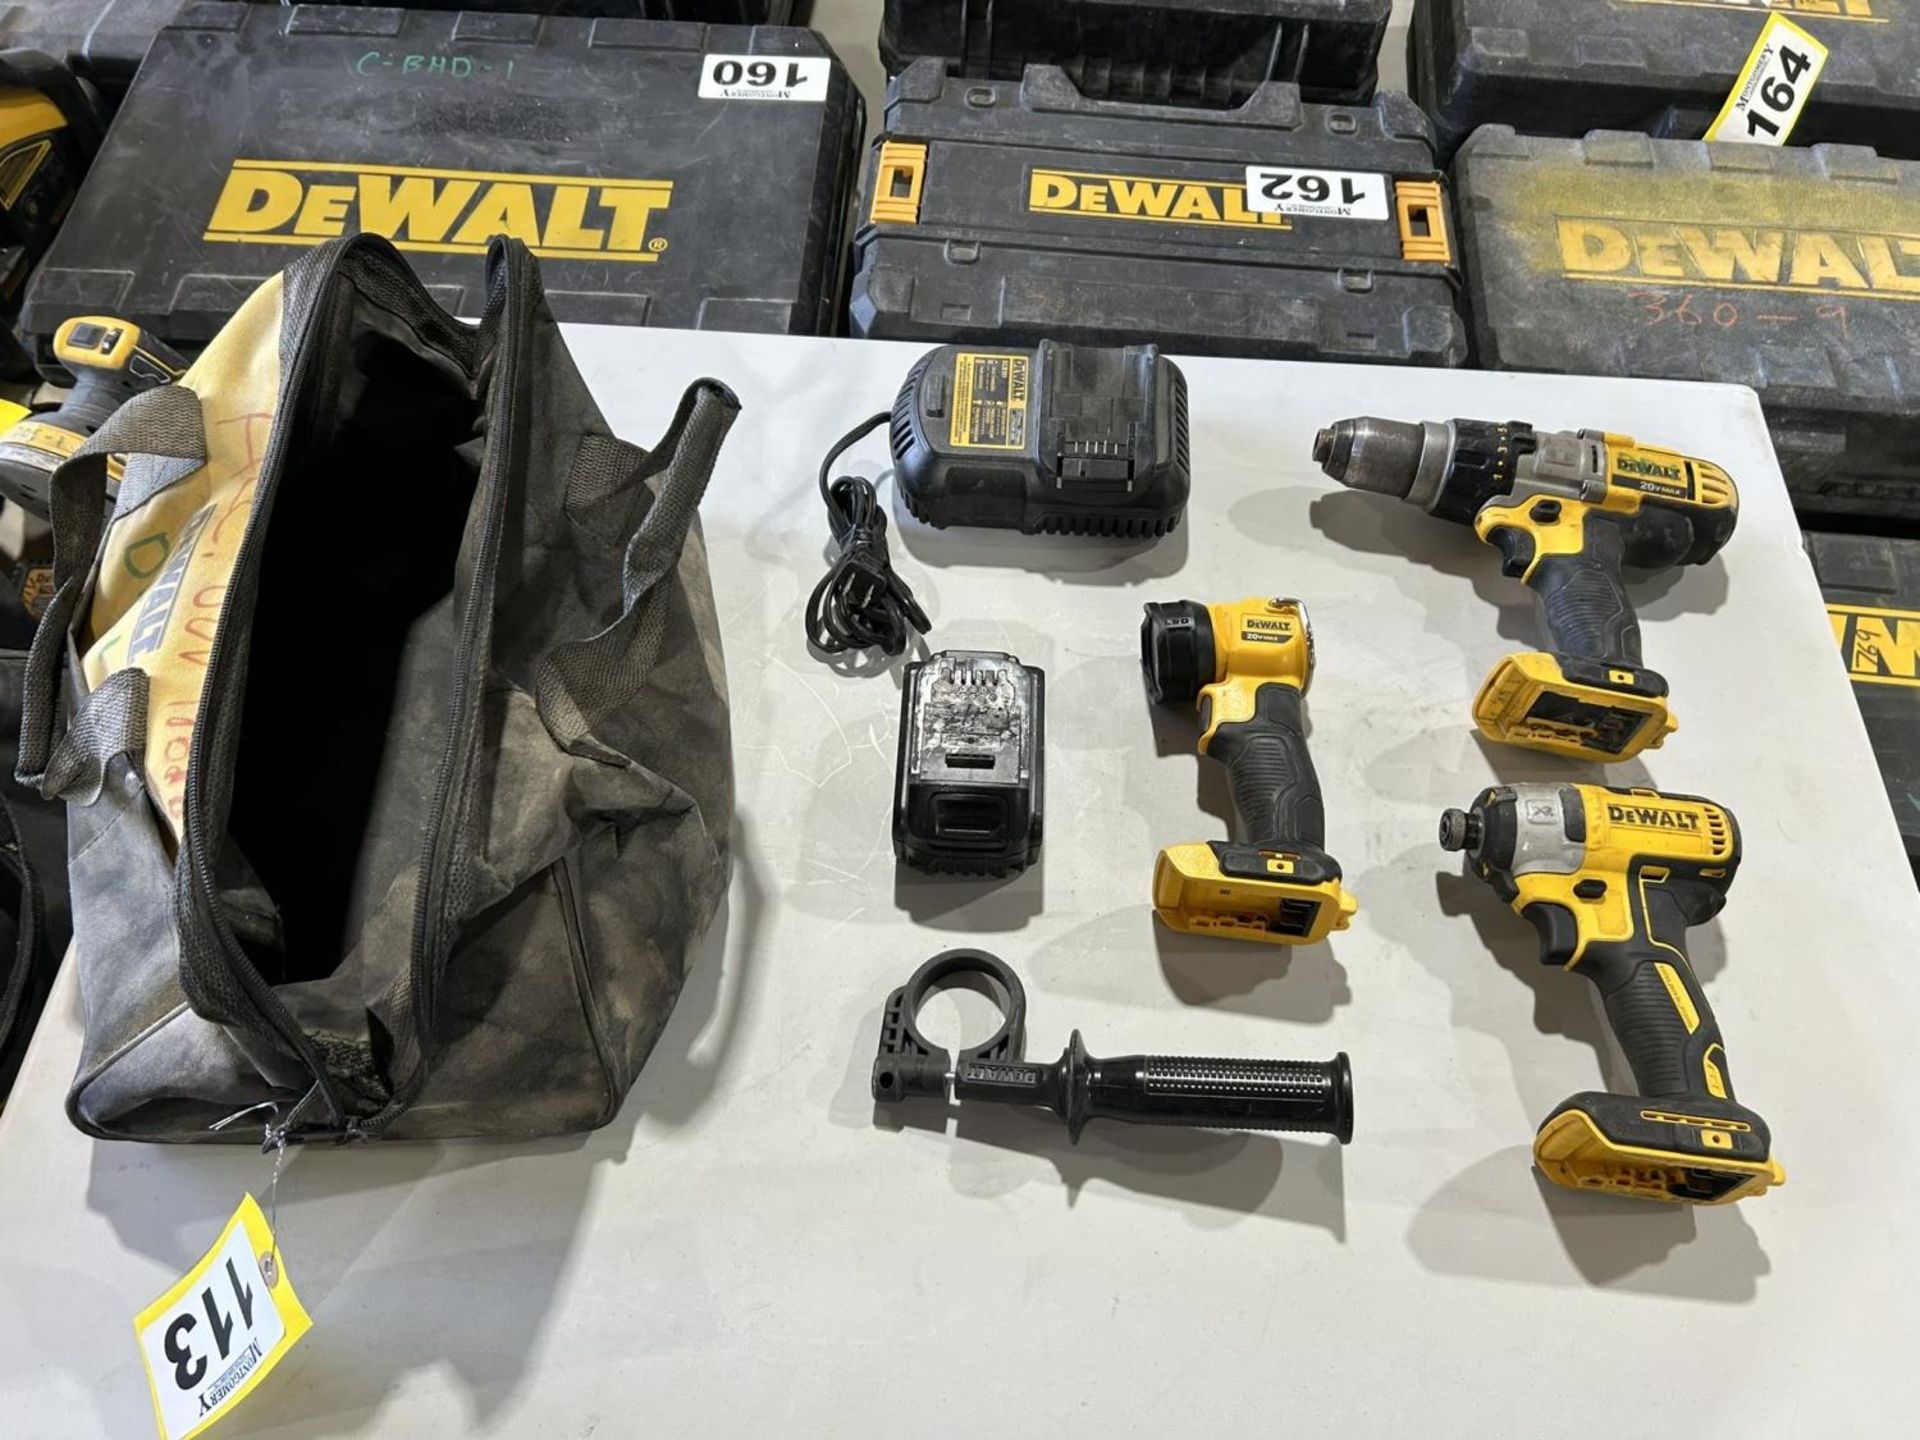 DEWALT CORDLESS IMPACT DRIVER, DRILL, & LIGHT W/ BATTERY AND CHARGER